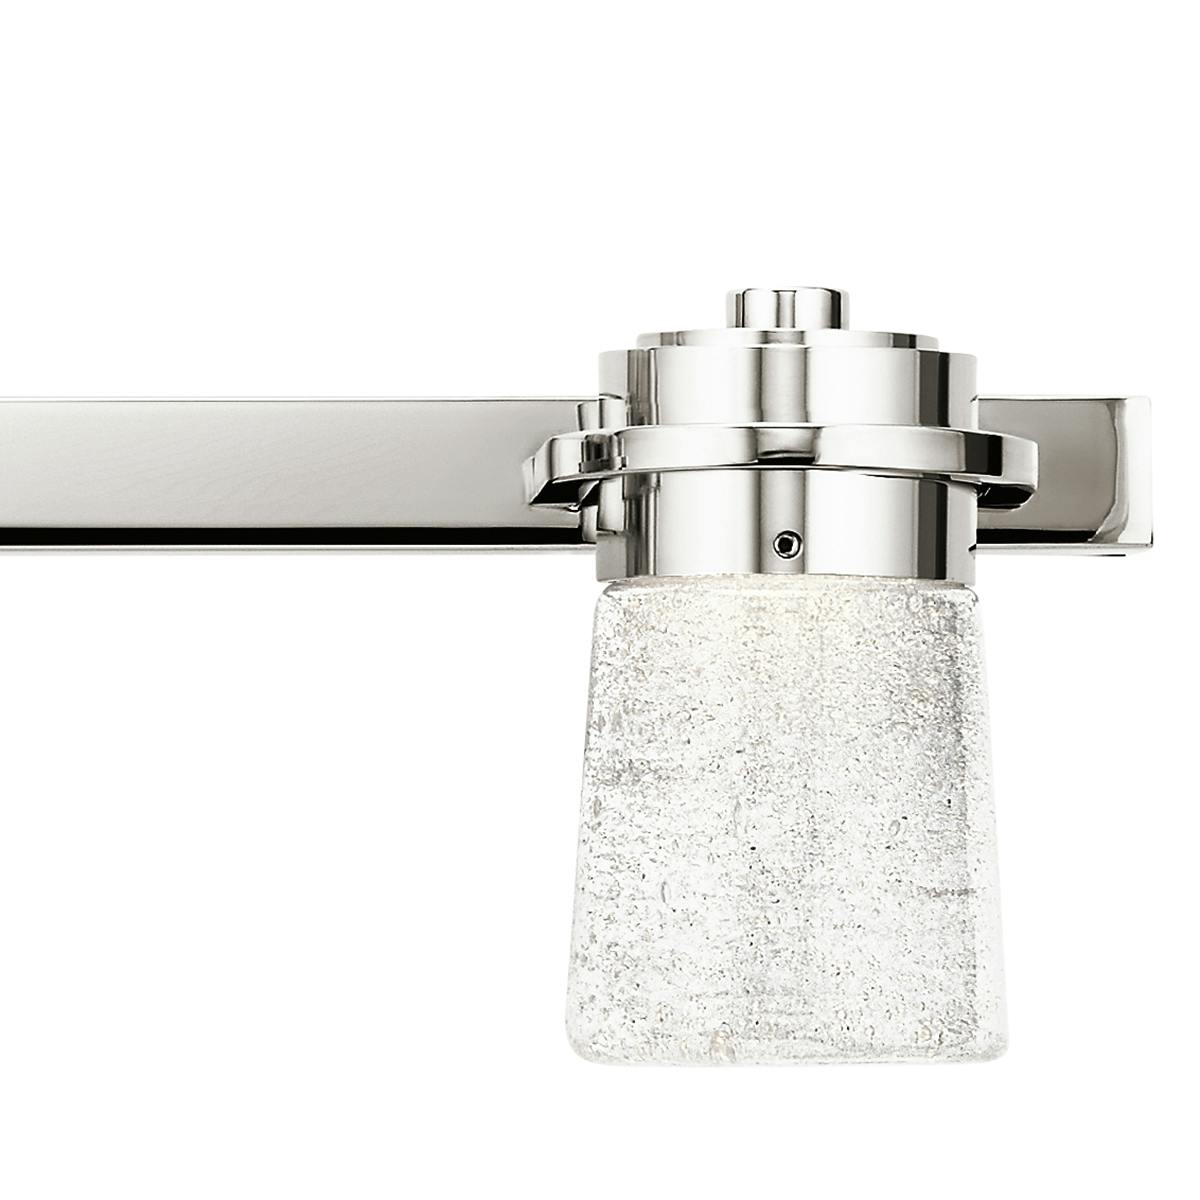 Close up view of the Vada 3000K 3 Light Vanity Light Nickel on a white background